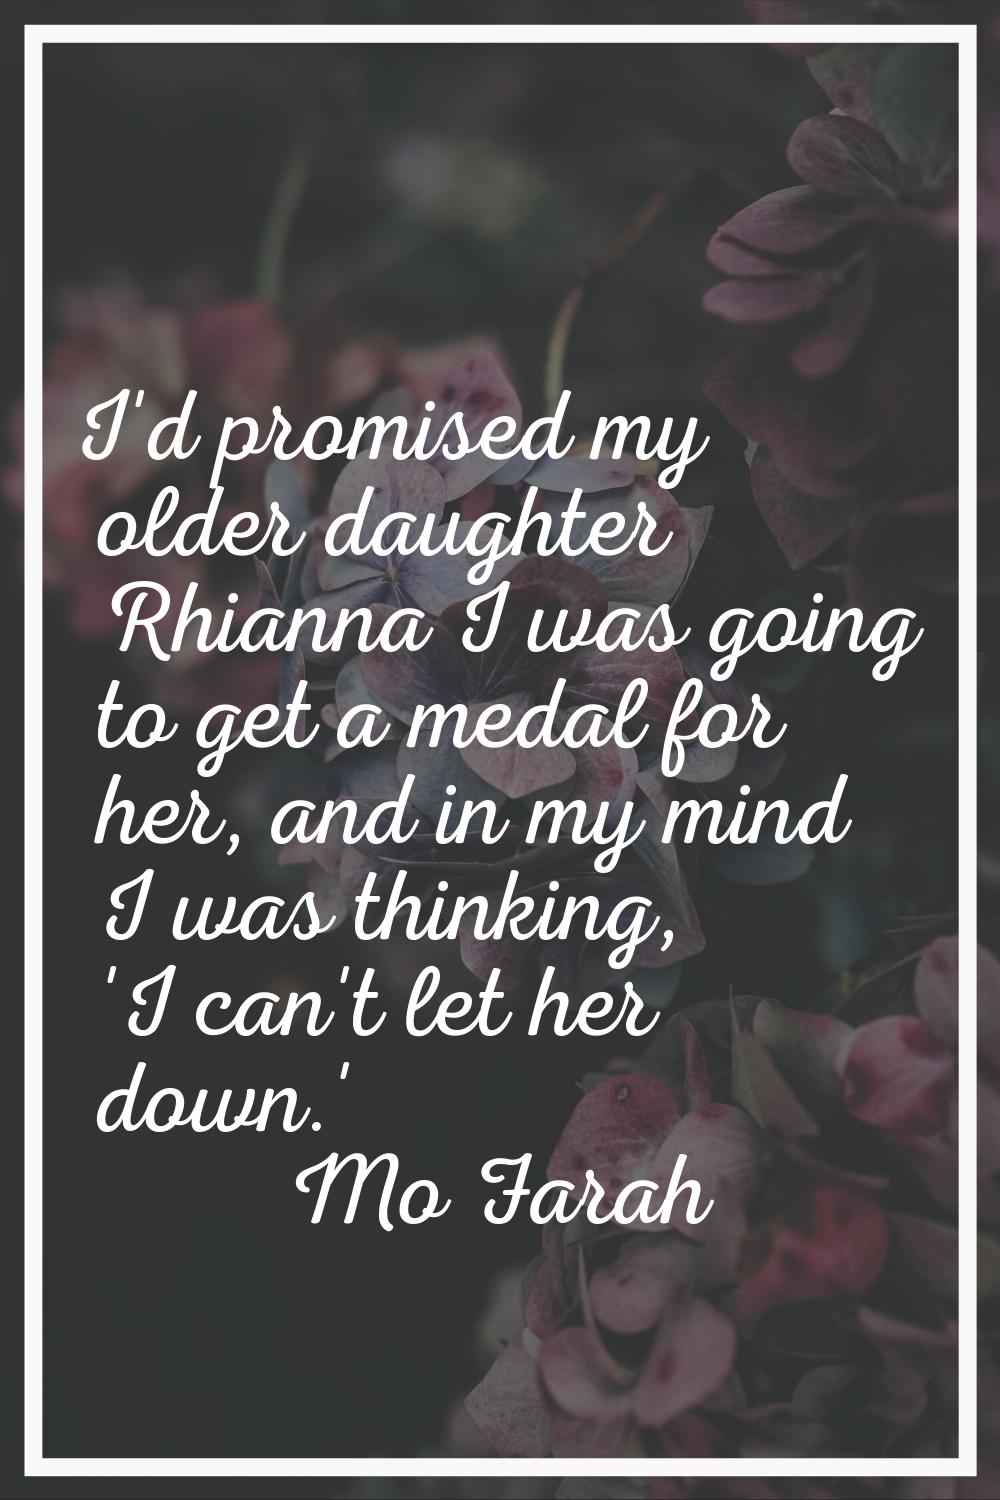 I'd promised my older daughter Rhianna I was going to get a medal for her, and in my mind I was thi